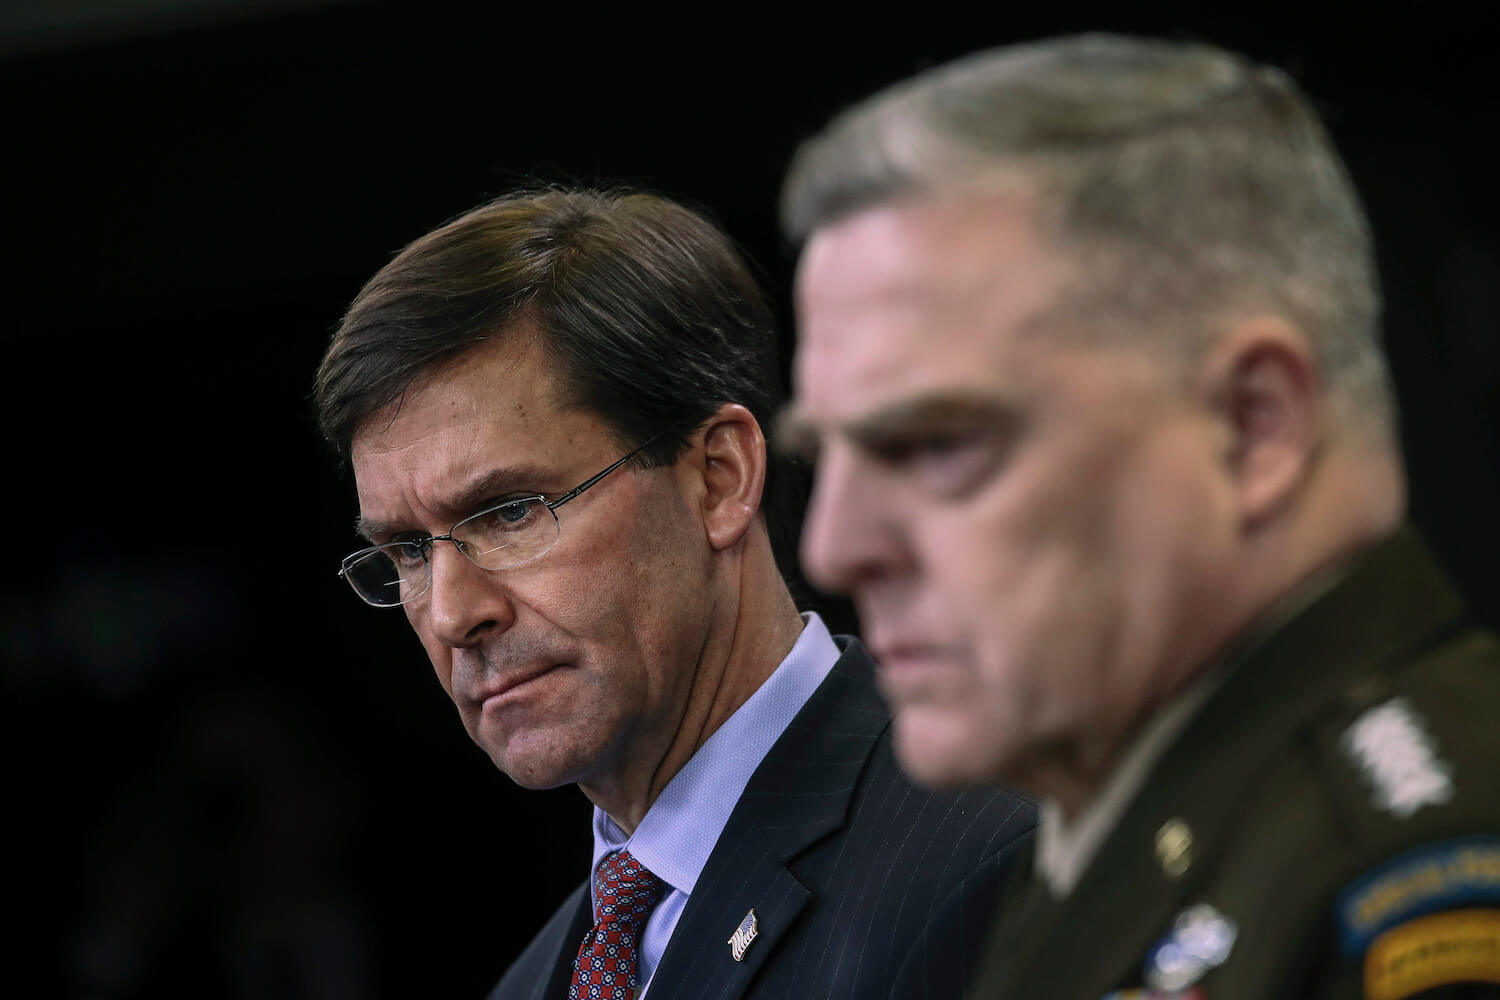 Pentagon Chief Reassures NATO Allies of American Commitment to Collective Security